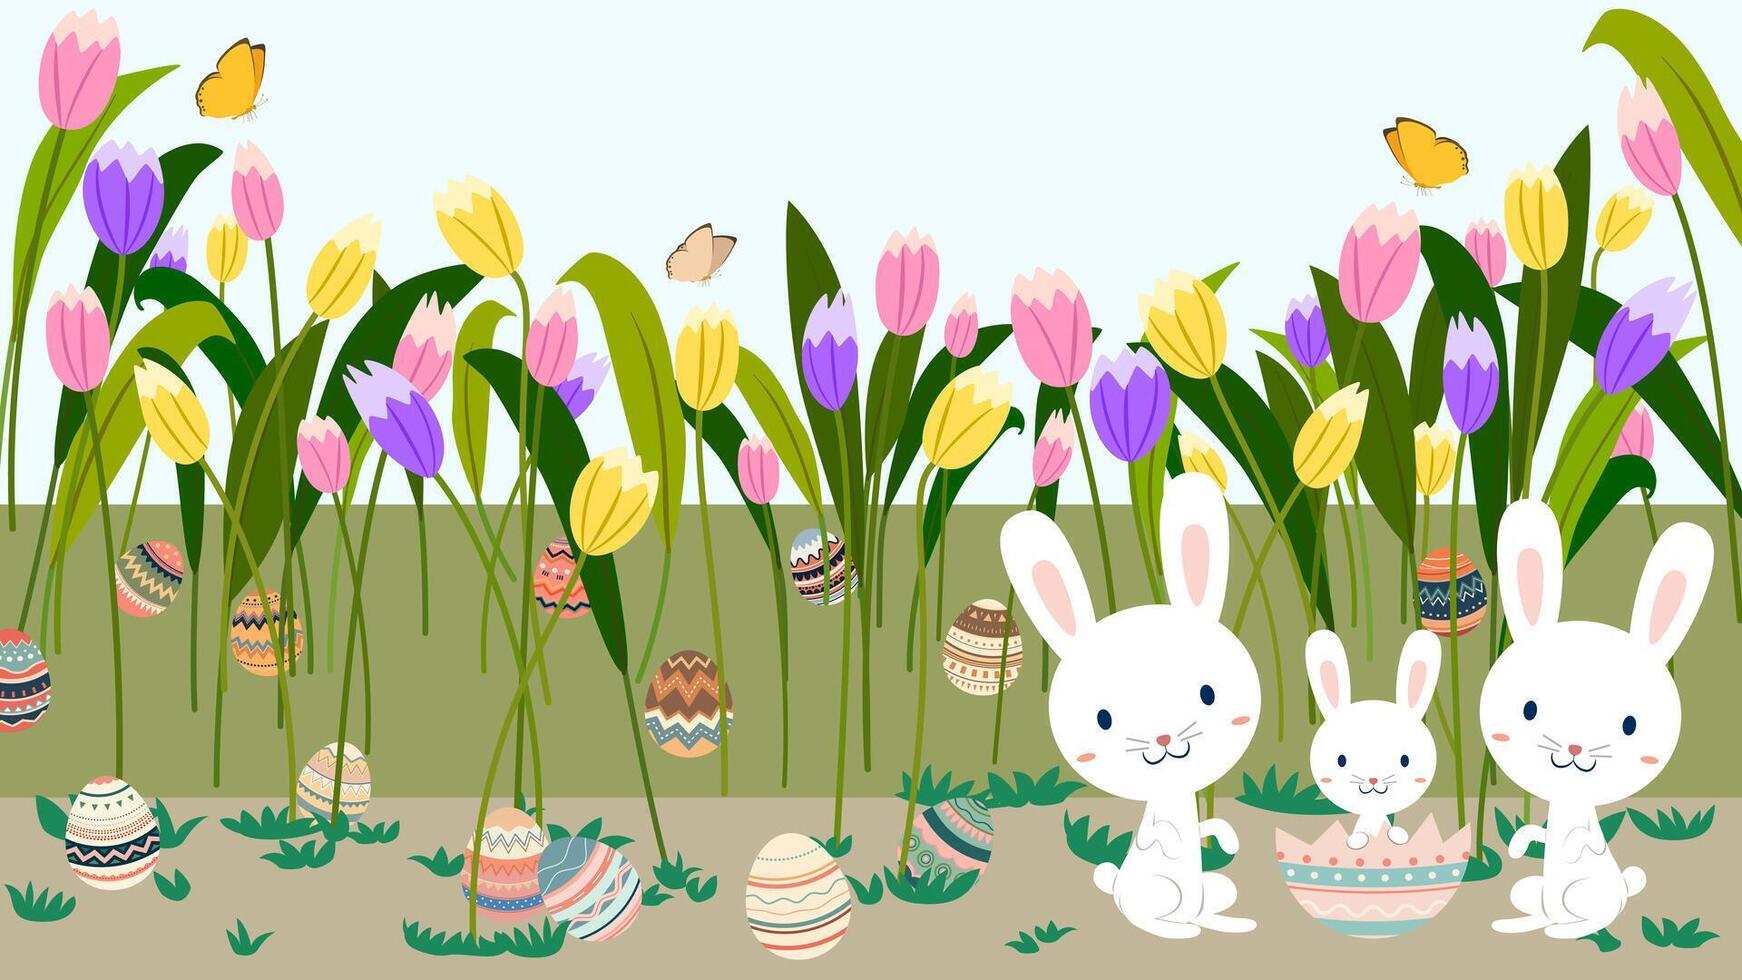 Cute cartoon Easter greeting banner, large greeting card, tulips, painted eggs and rabbit vector